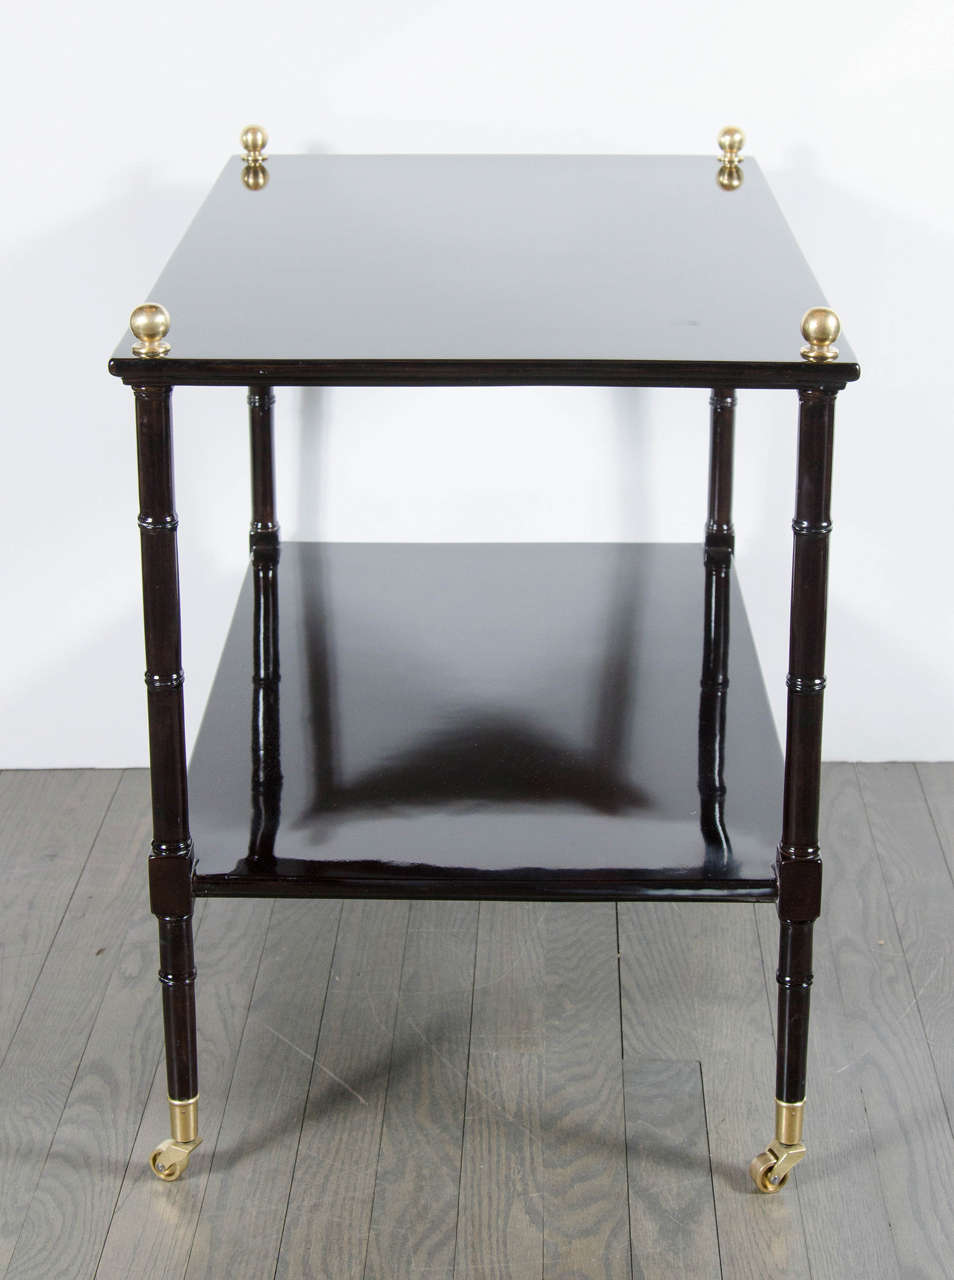 Mid-20th Century Mid-Century Modern Two-Tier Occasional Table in Ebonized Walnut and Brass